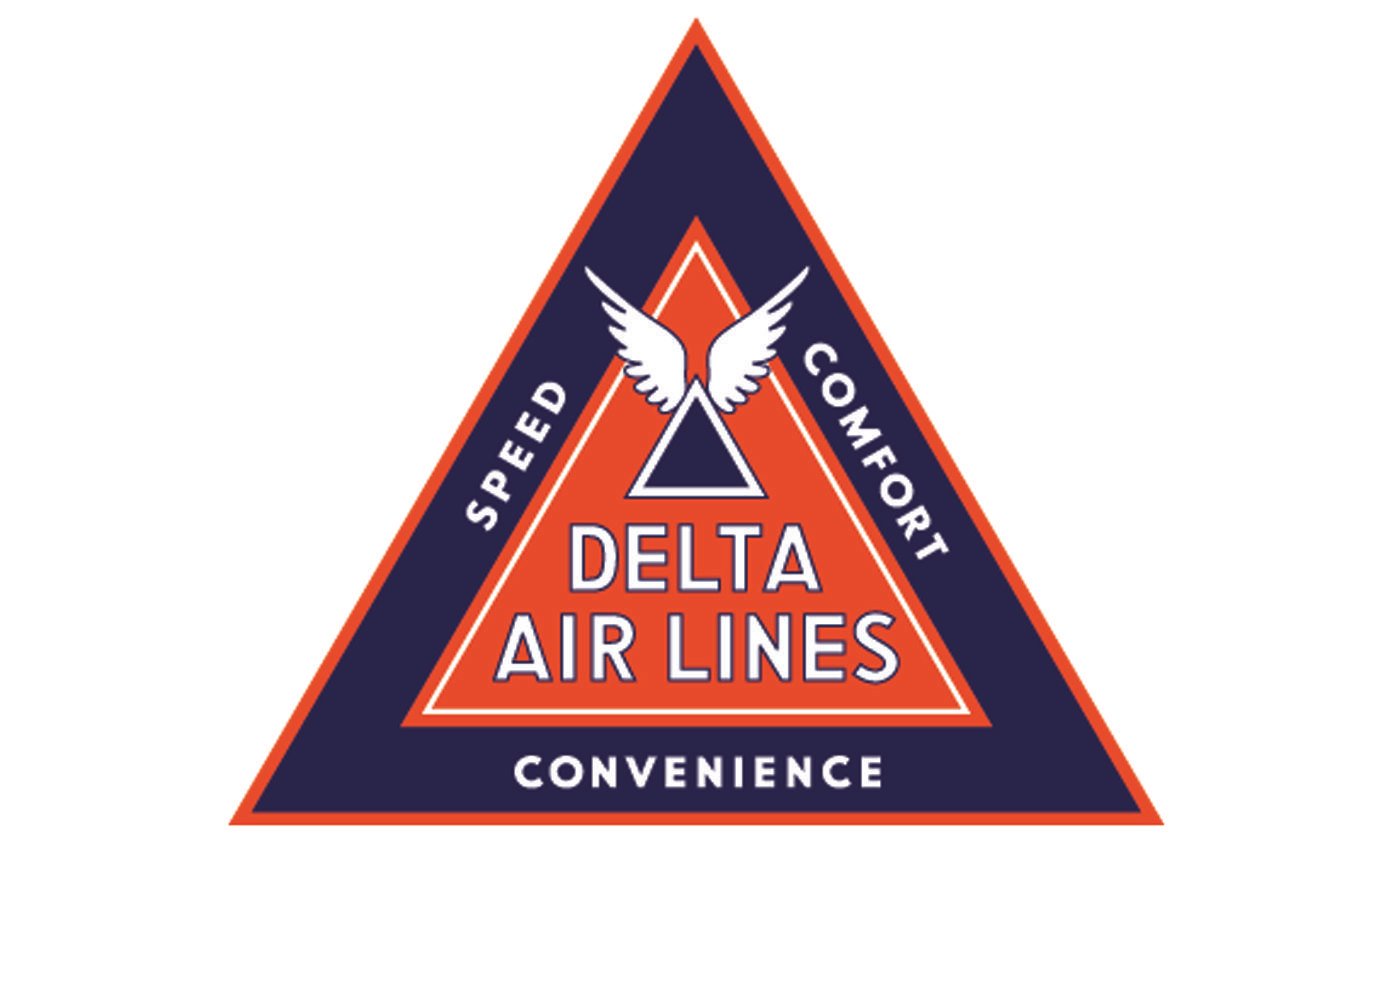 Commercial Airline Logo - Delta Airlines Widget Logo - WIRING DIAGRAMS •